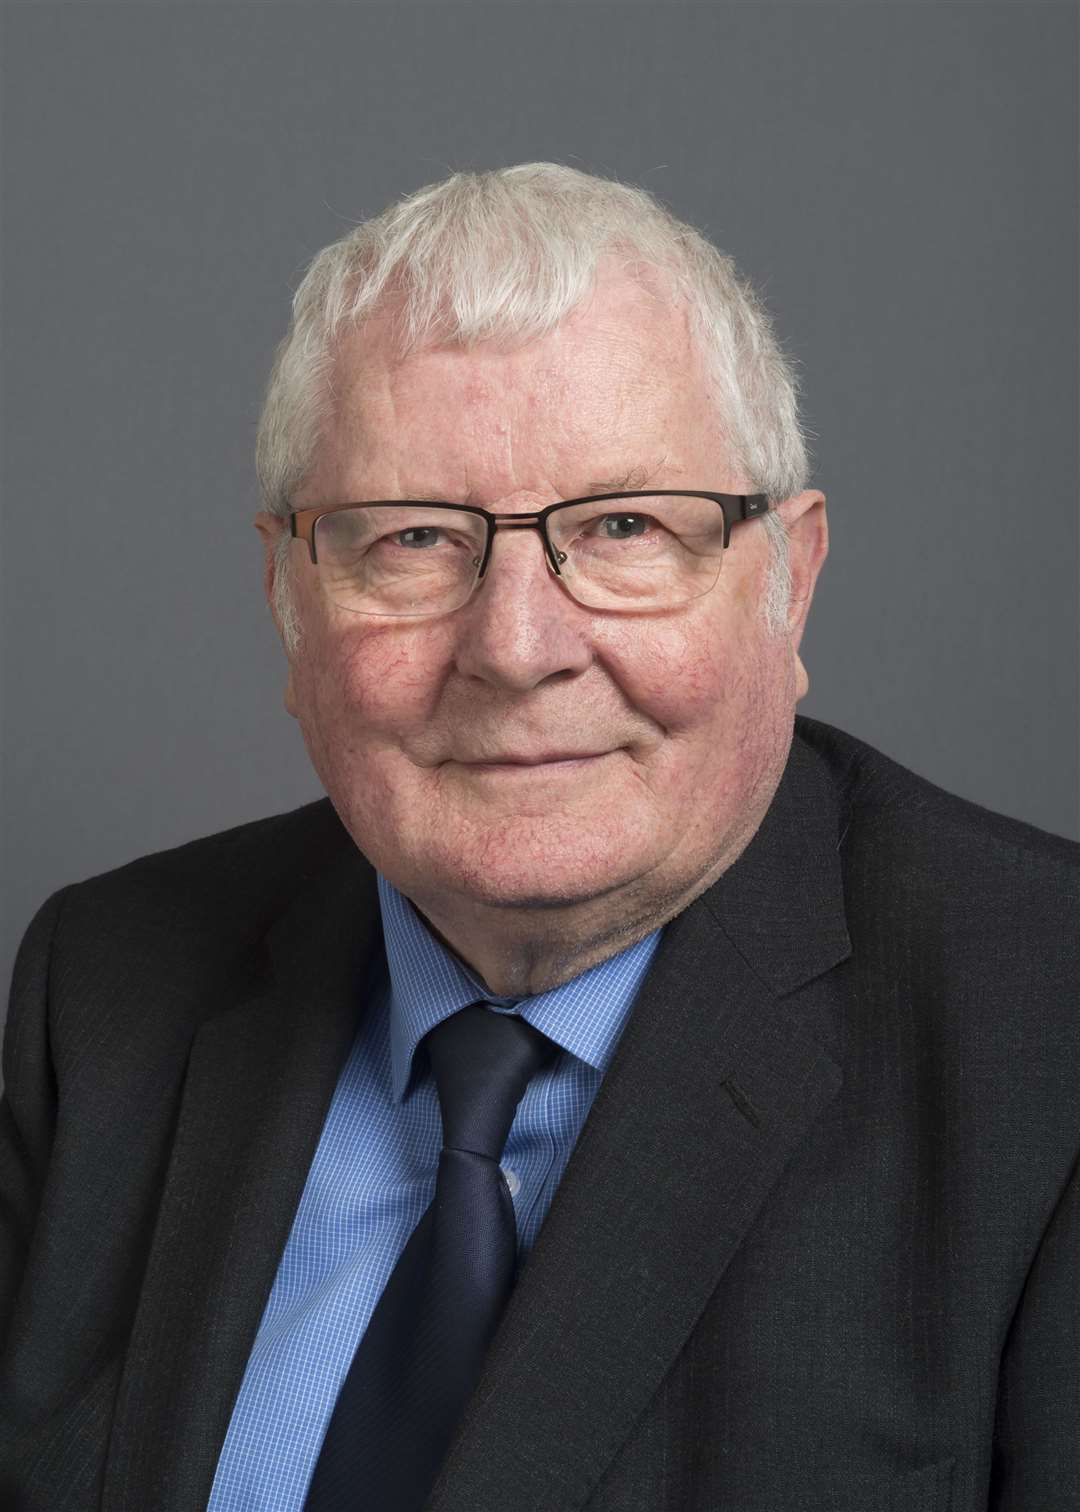 Councillor Norman Smith supported the request to change the boundary.